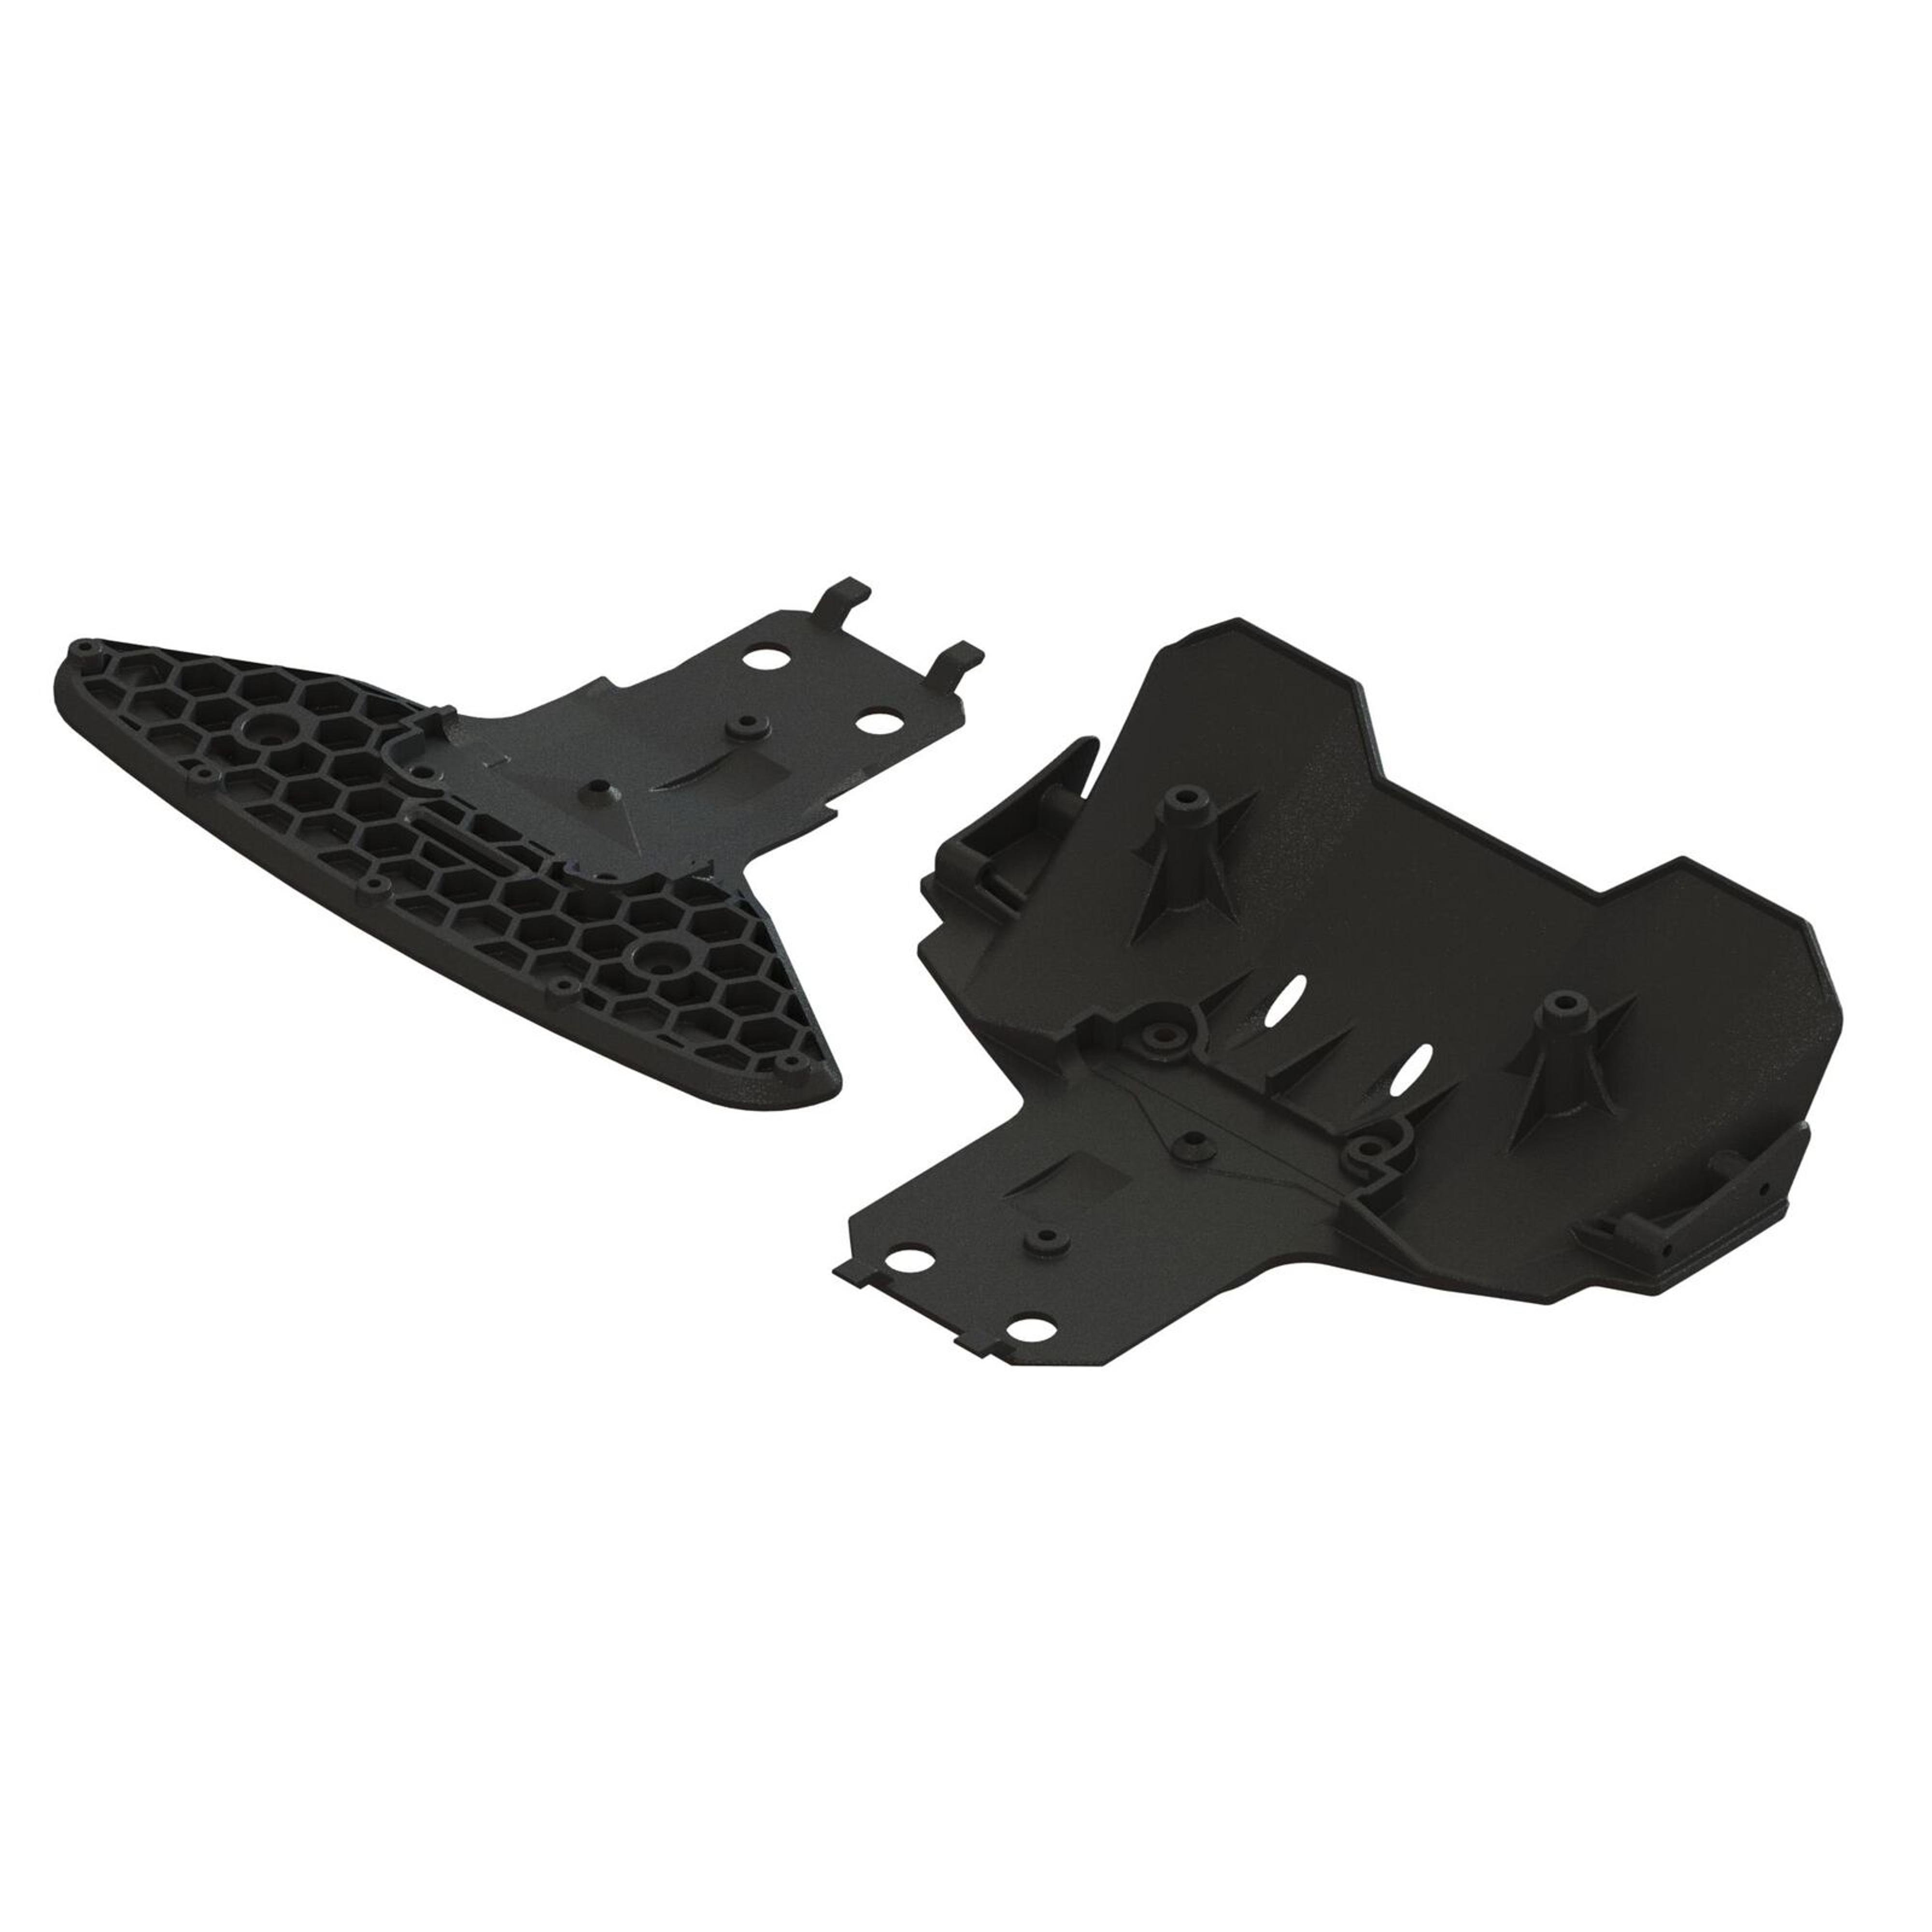 ARRMA Lower Front Bumper and Rear Diffuser Set (Infraction, Vendetta)